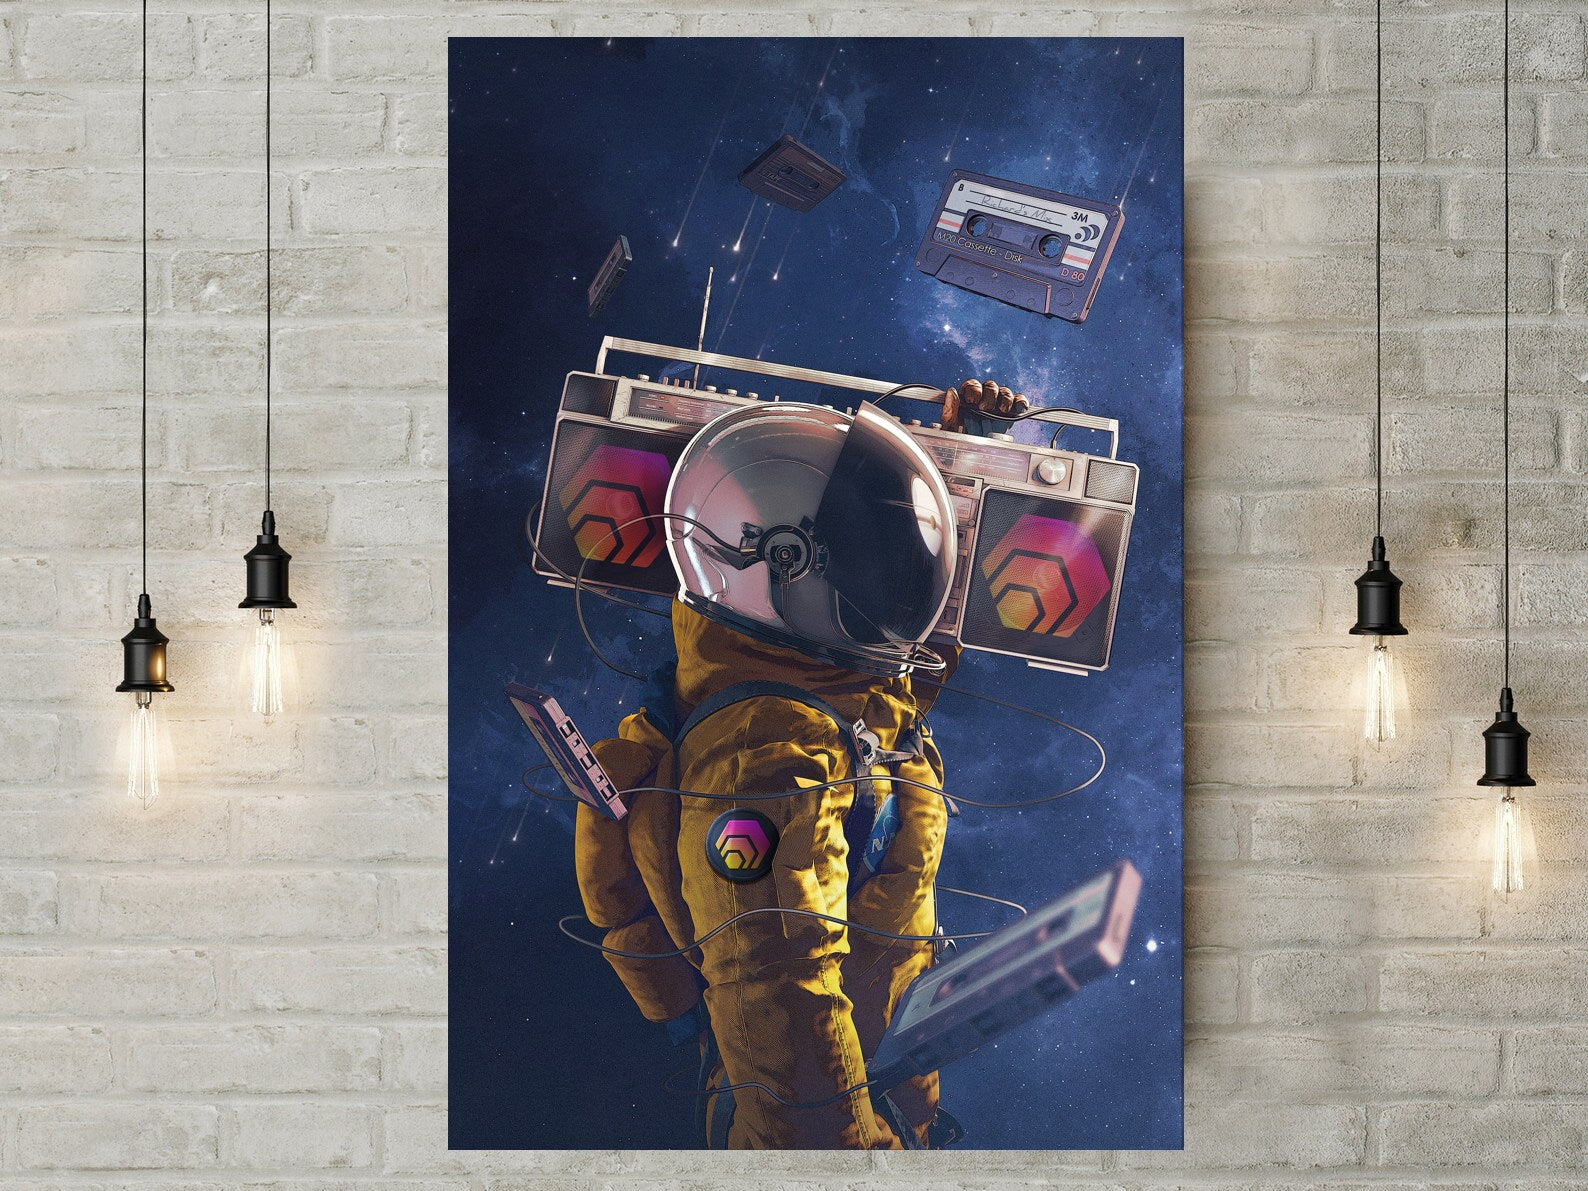 'Major Rich' - HEX Astronaut Poster Print Variant, 24"x36" inch - Limited to 50